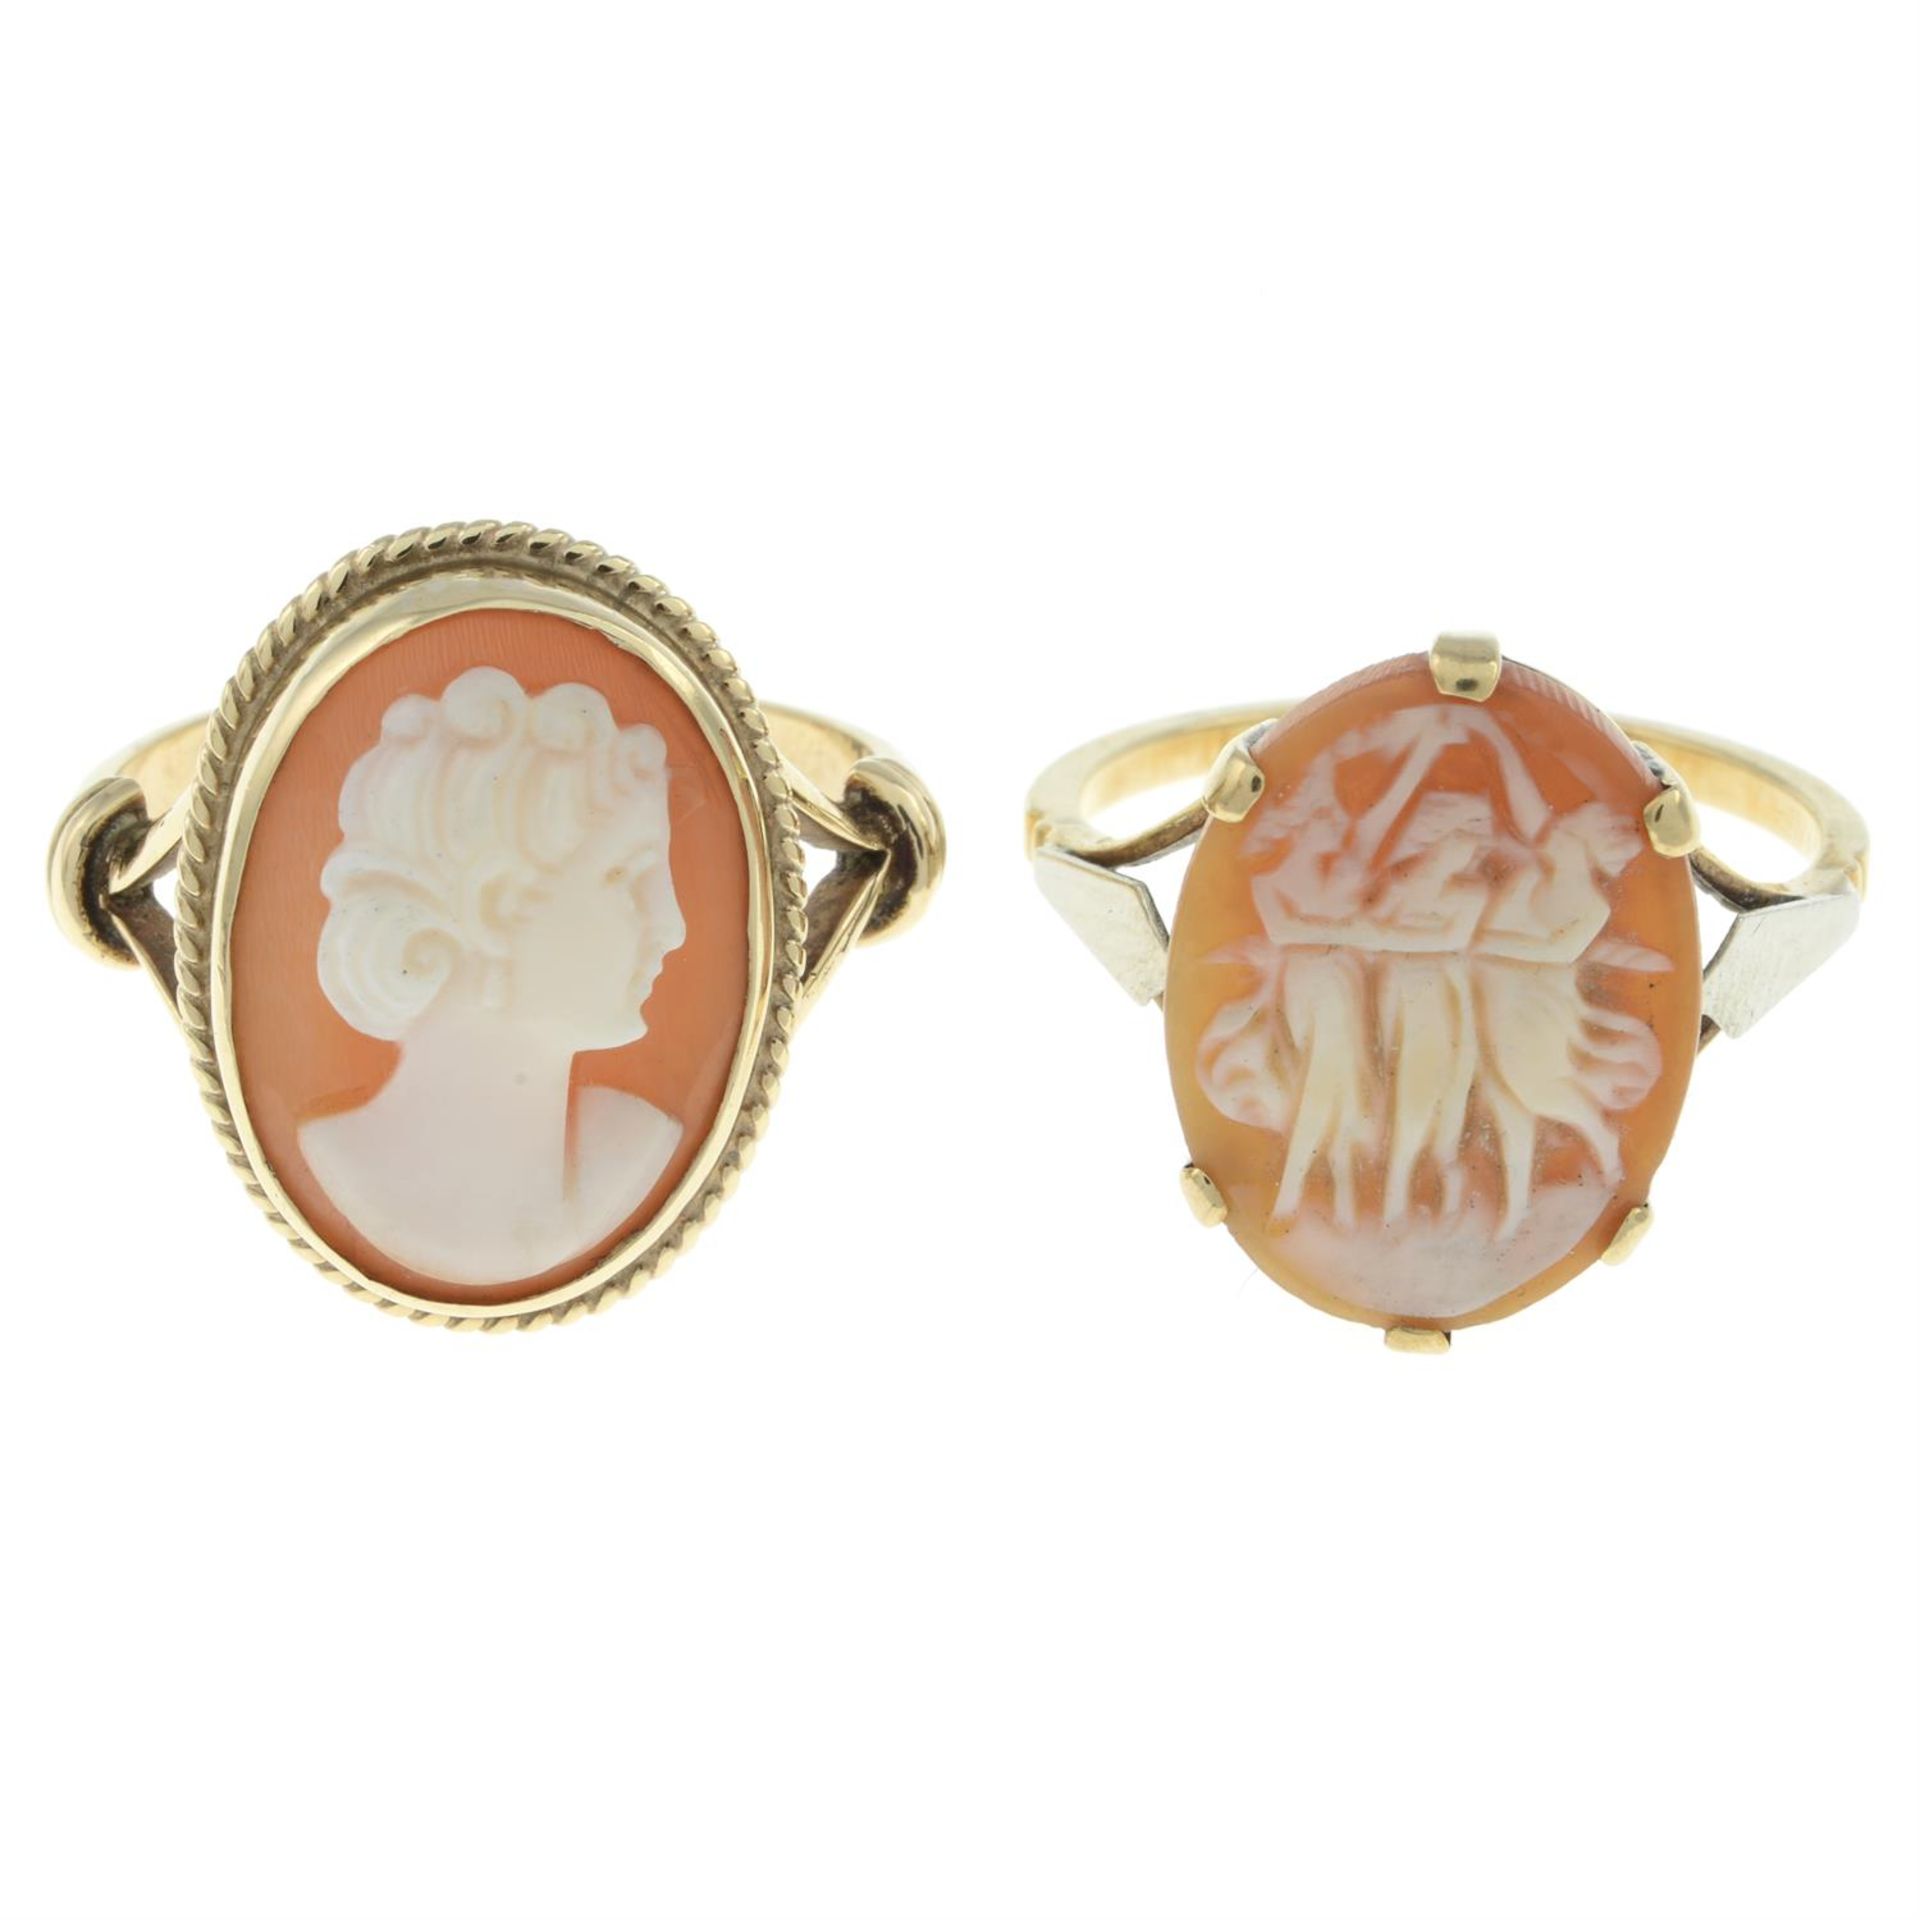 Two mid 20th century cameo rings